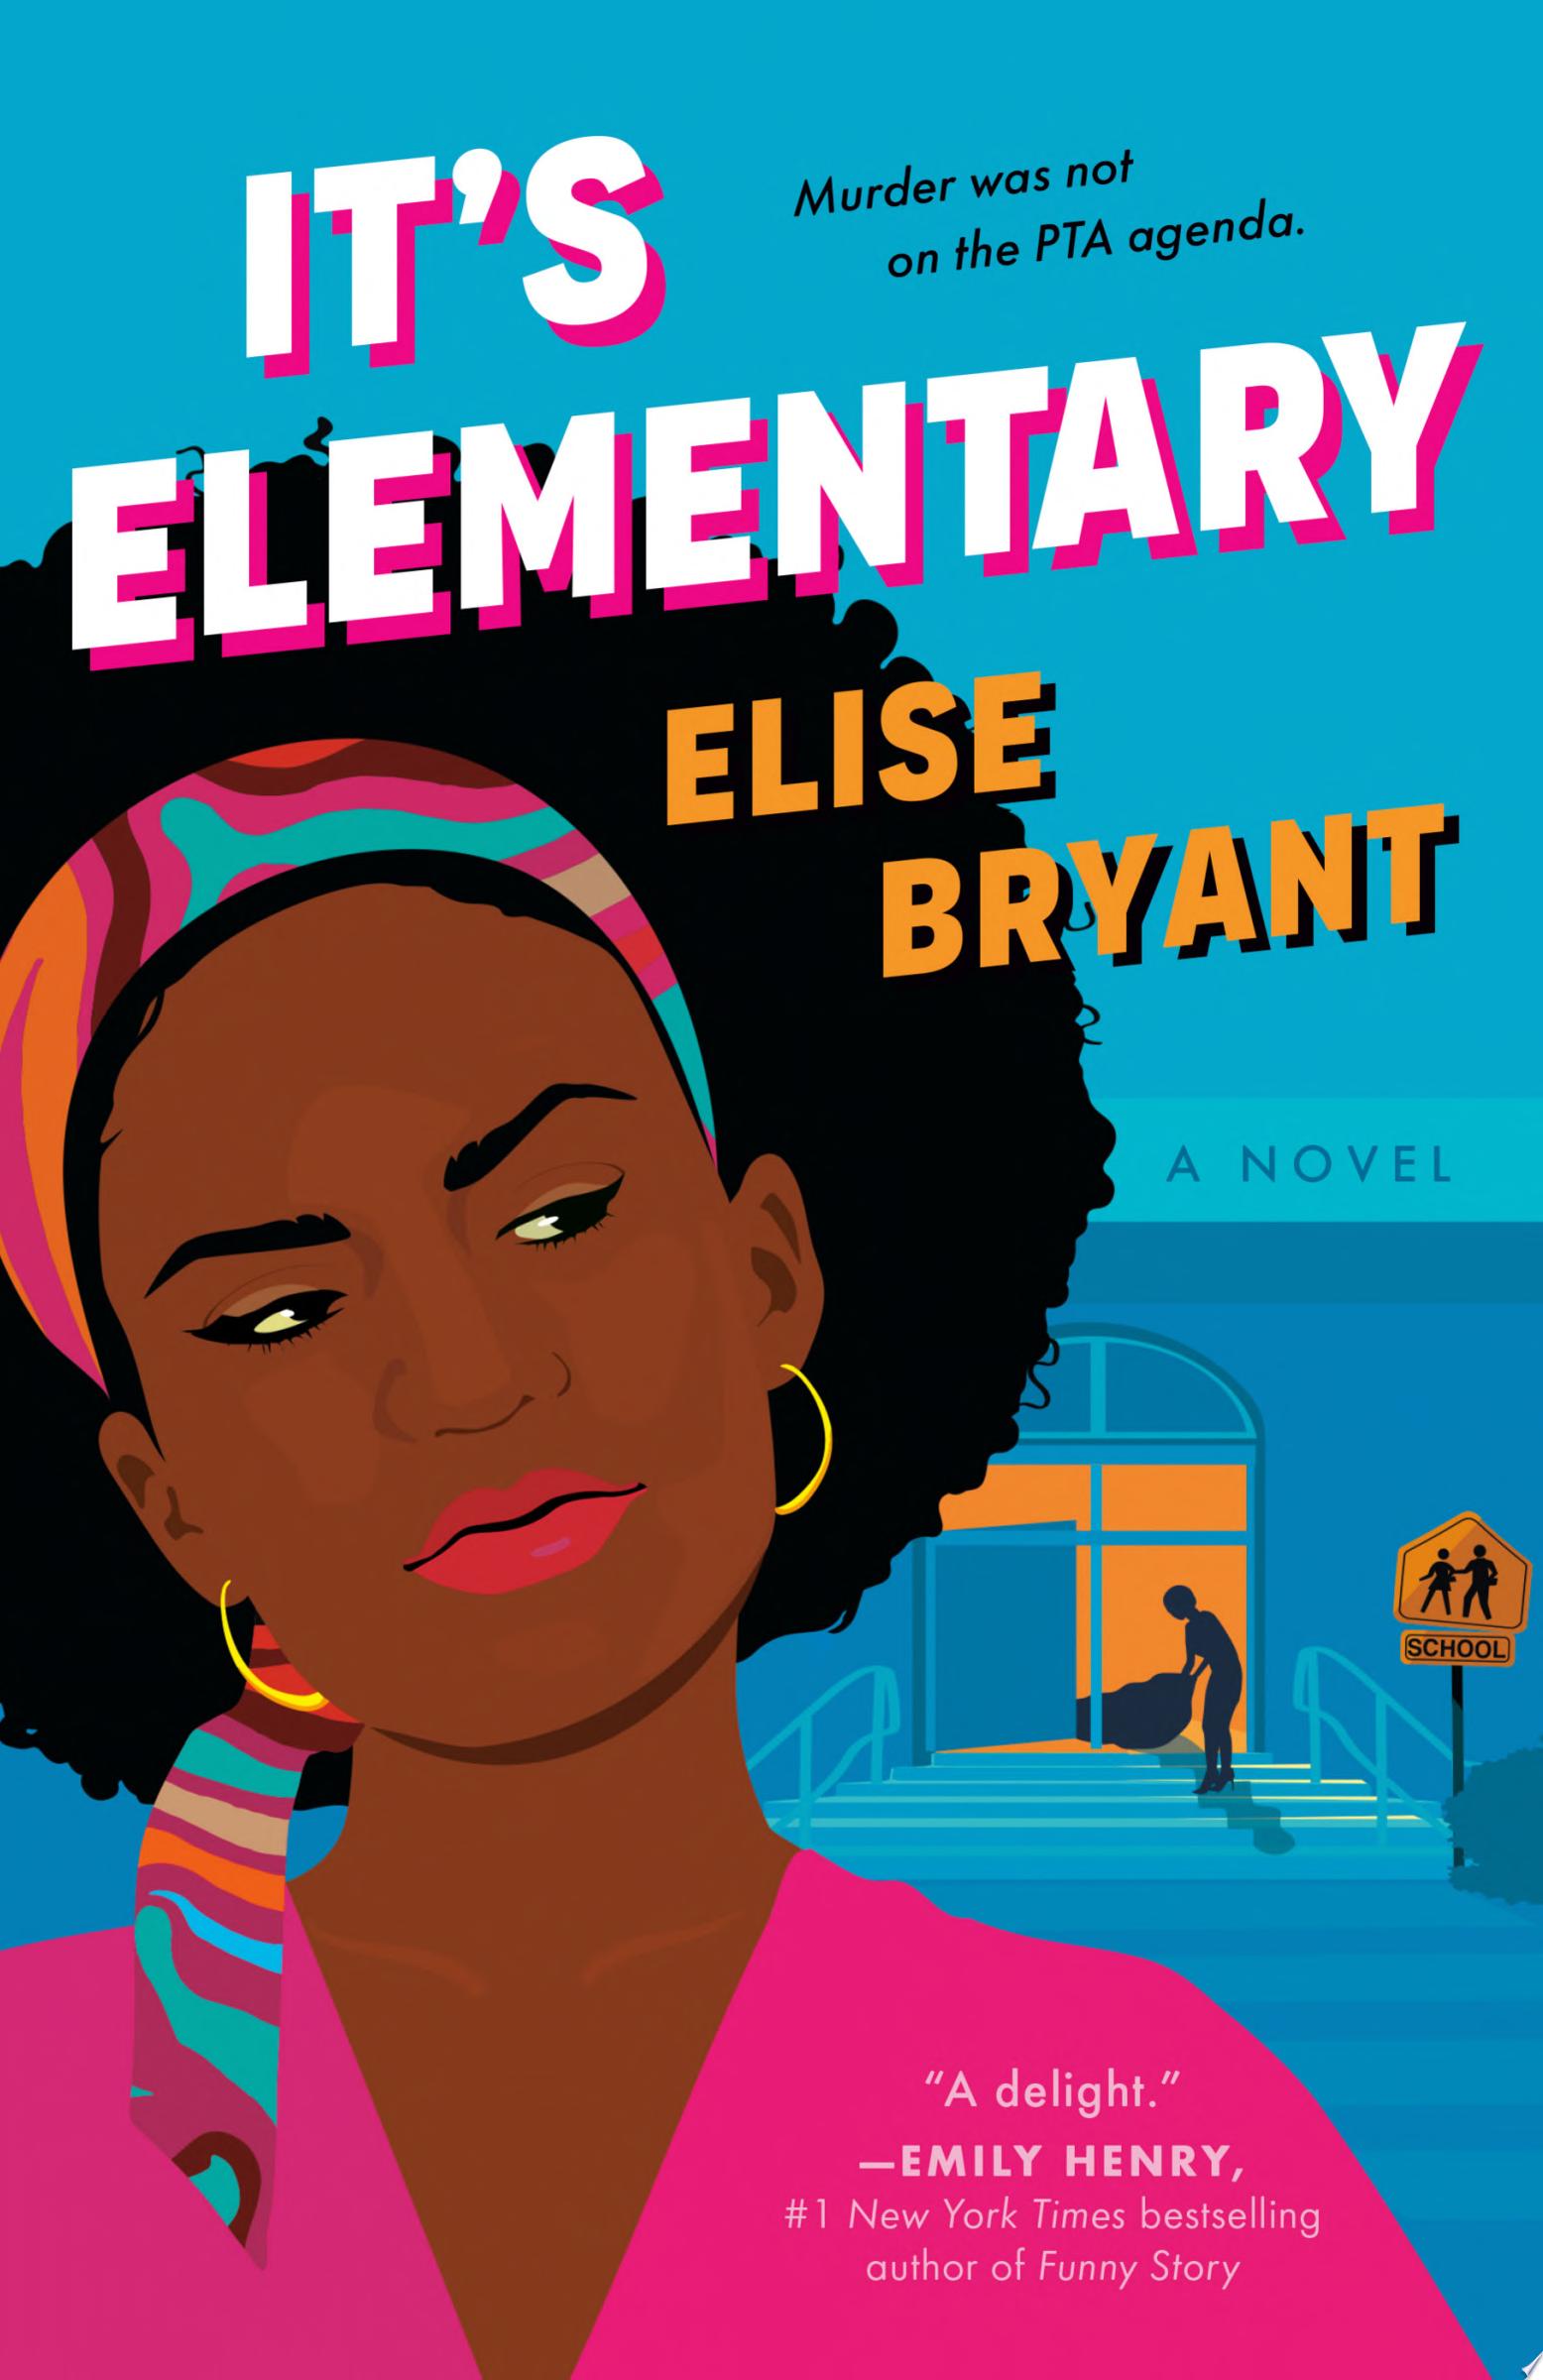 Image for "It's Elementary" by Elise Bryant